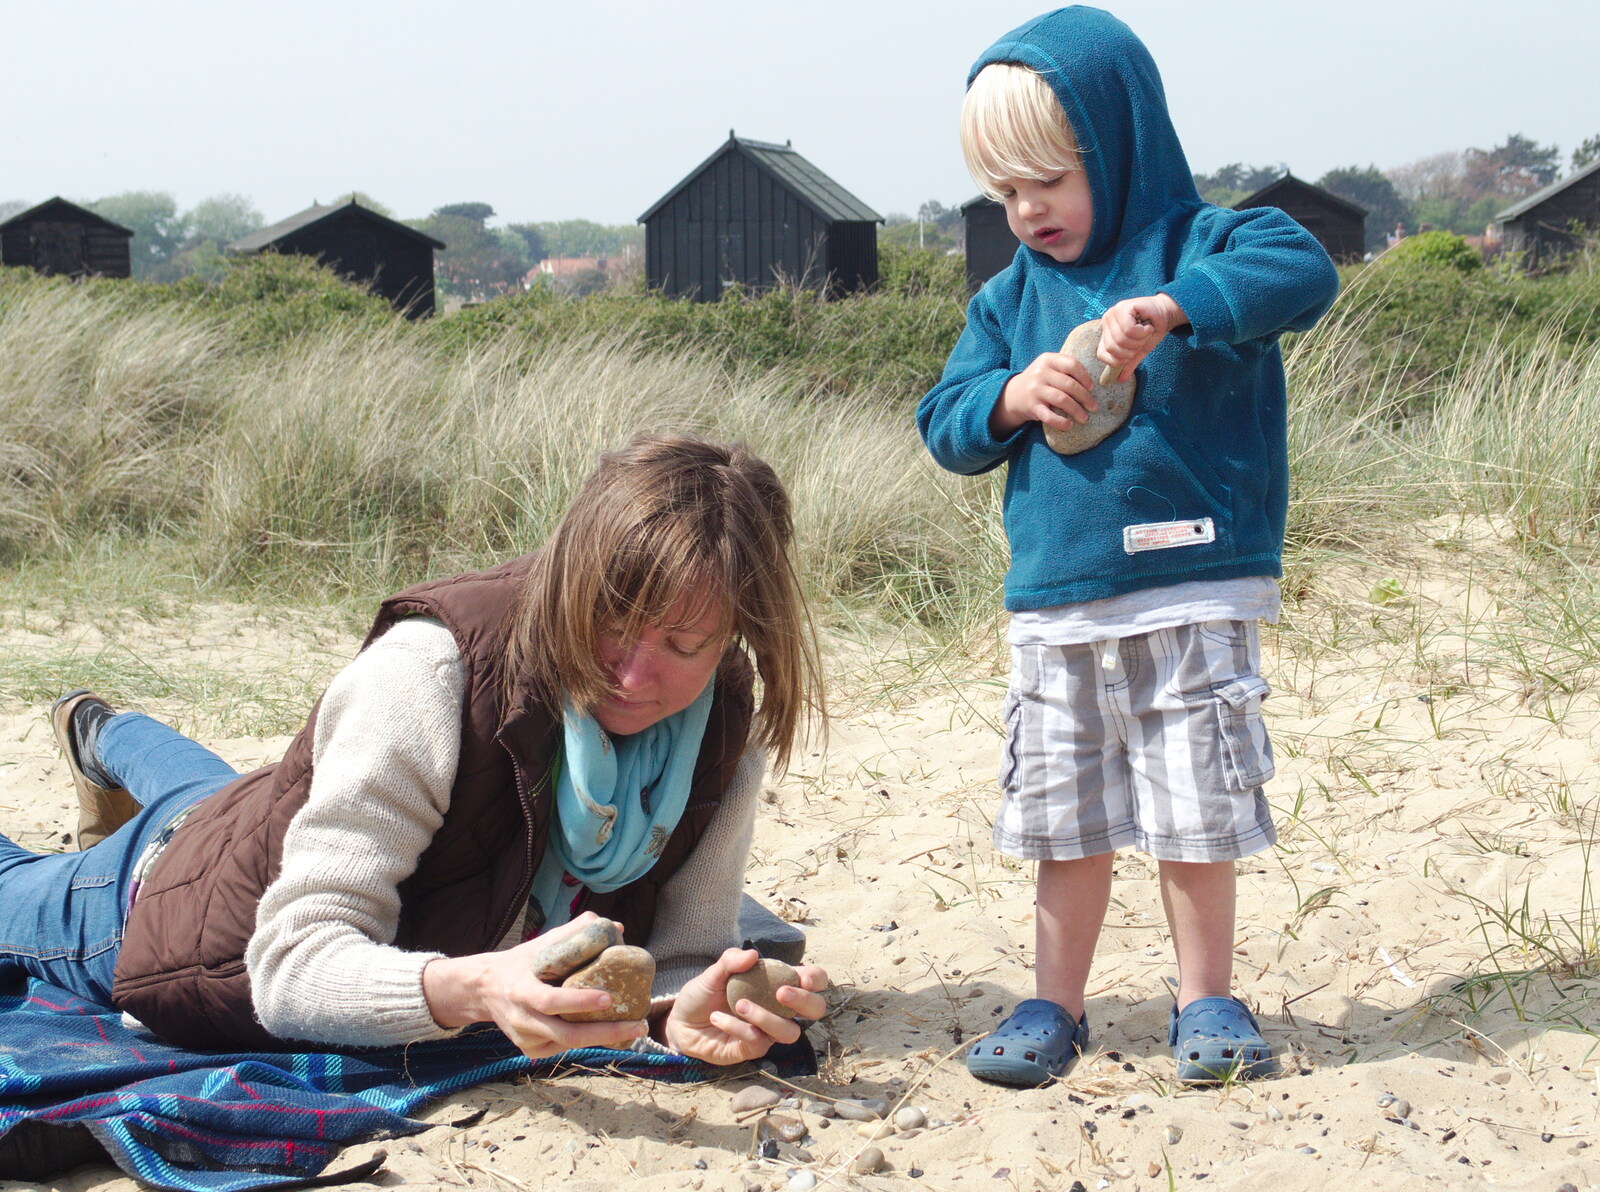 Martina's got some stones from Life's A Windy Beach, Walberswick, Suffolk - 5th May 2014